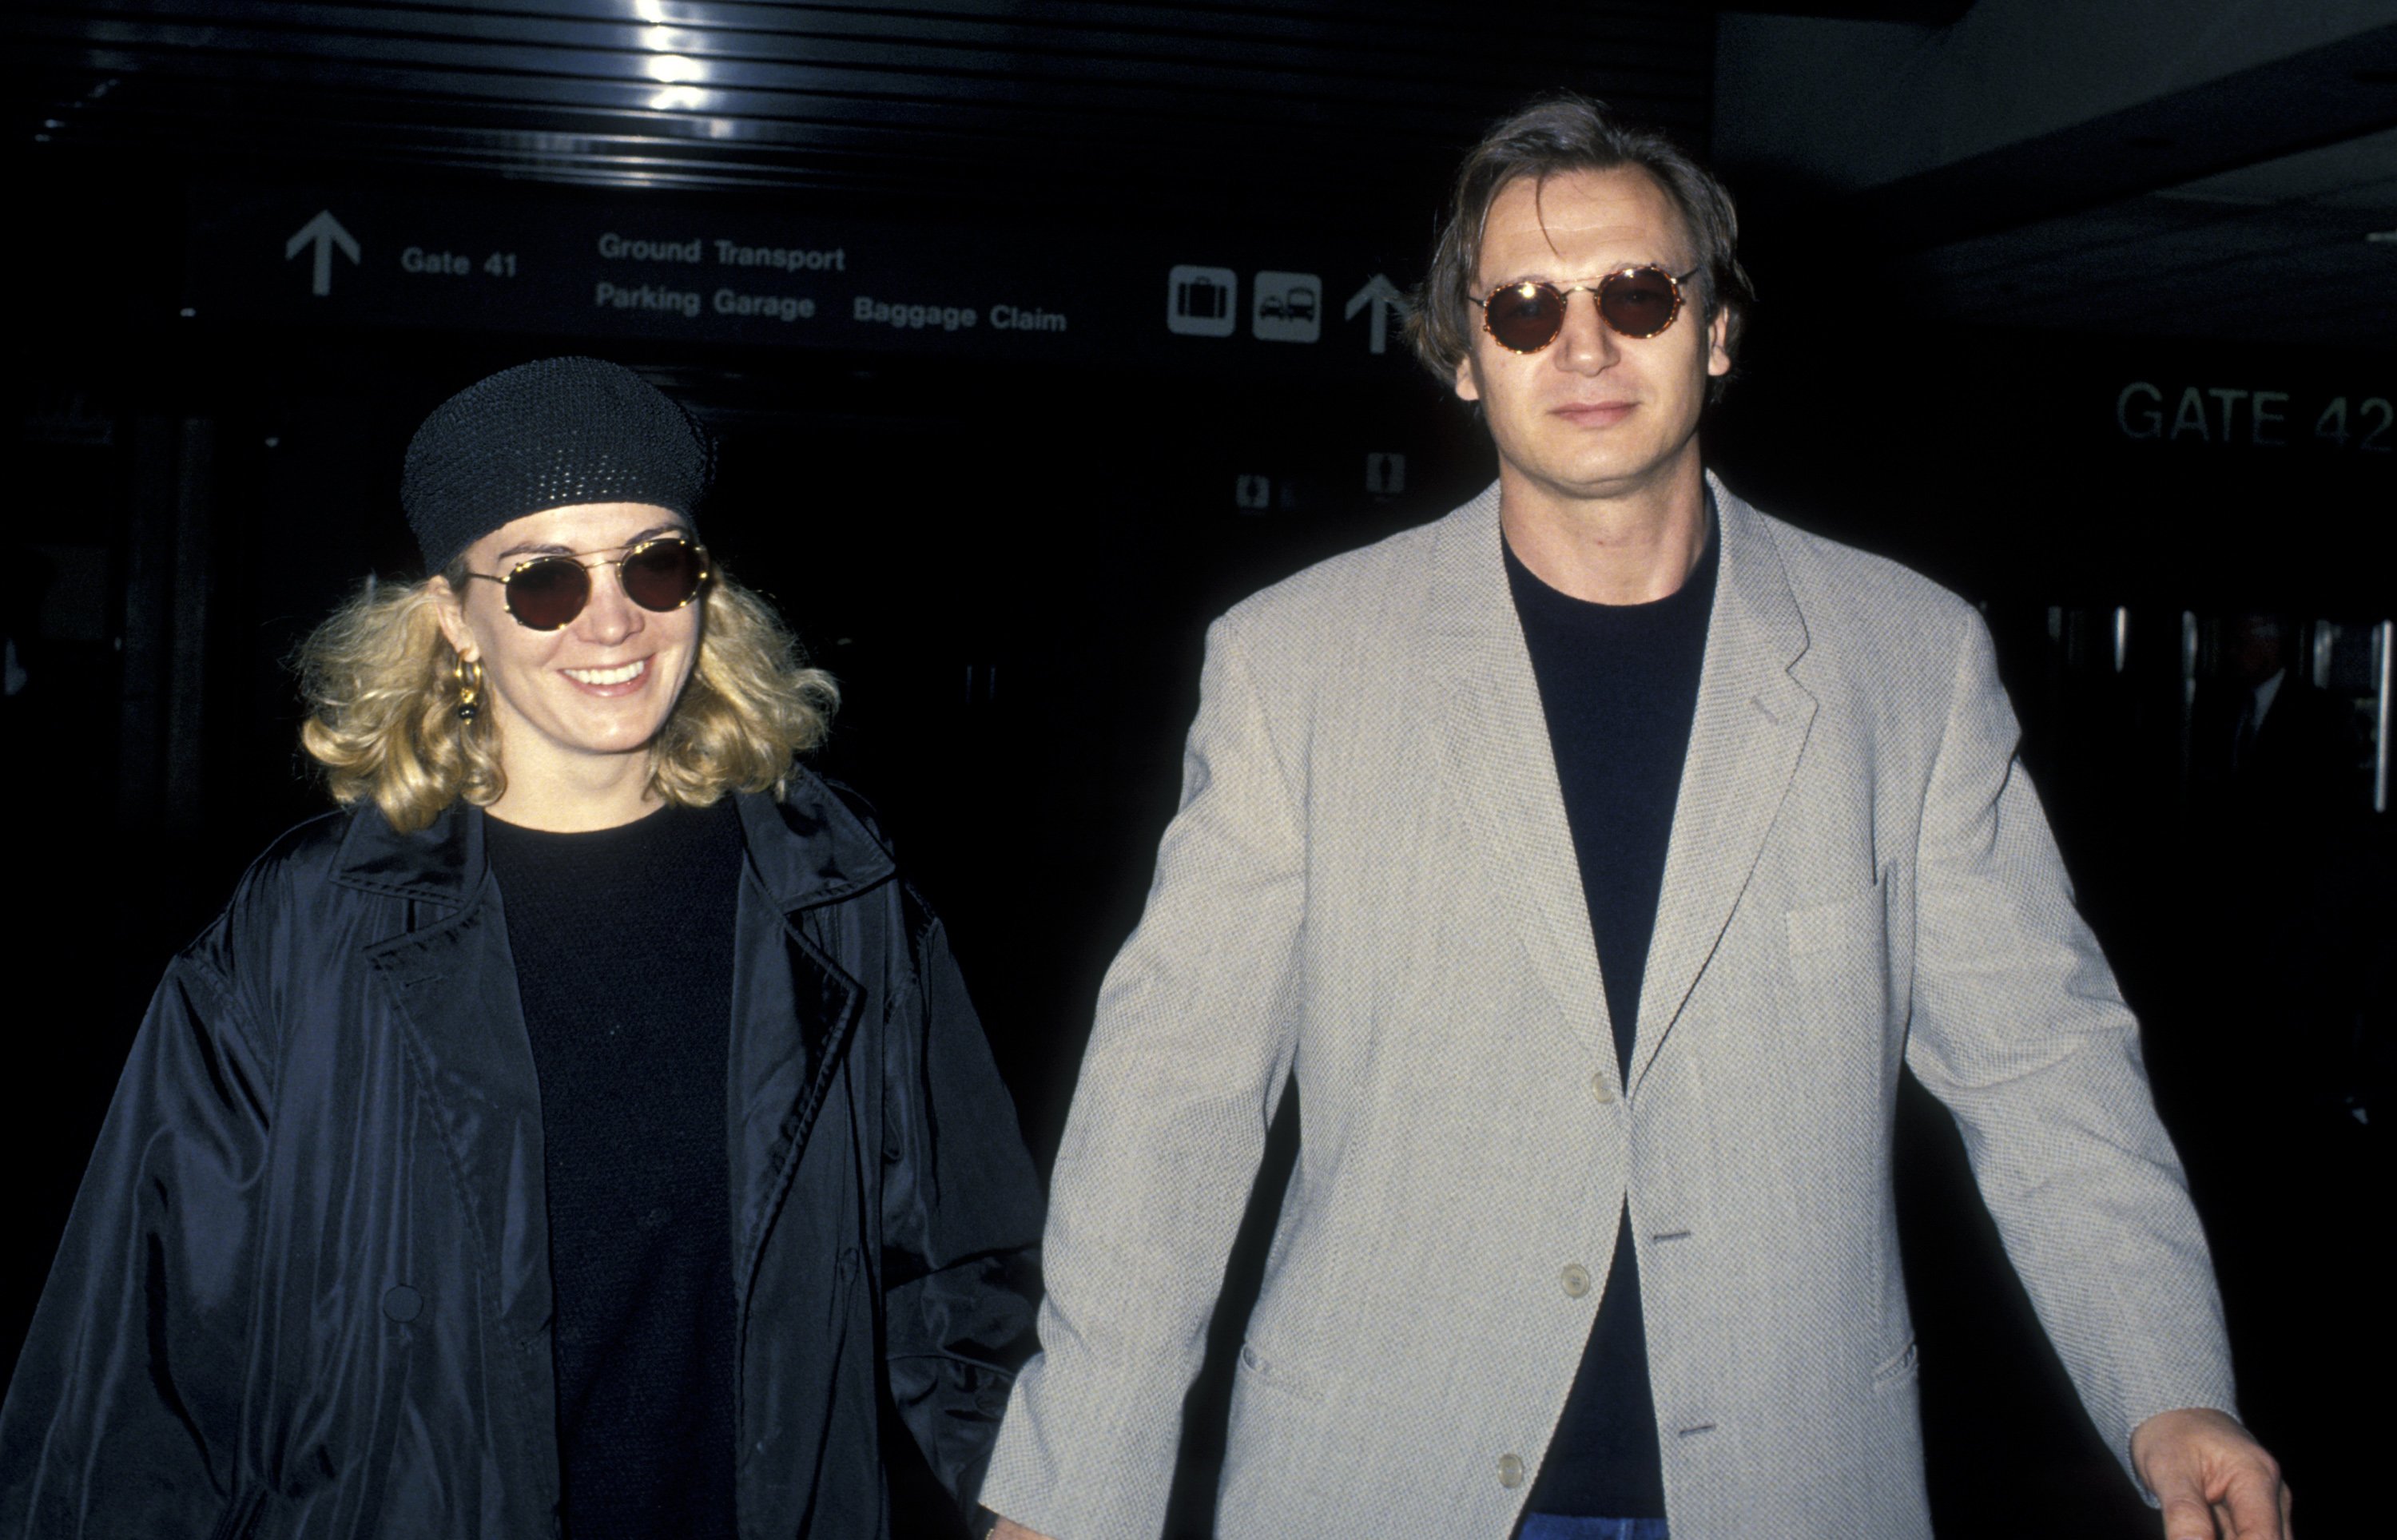 Natasha Richardson and Liam Neeson depart for New York City at Los Angeles International Airport in Los Angeles, California, United States. | Source: Getty Images